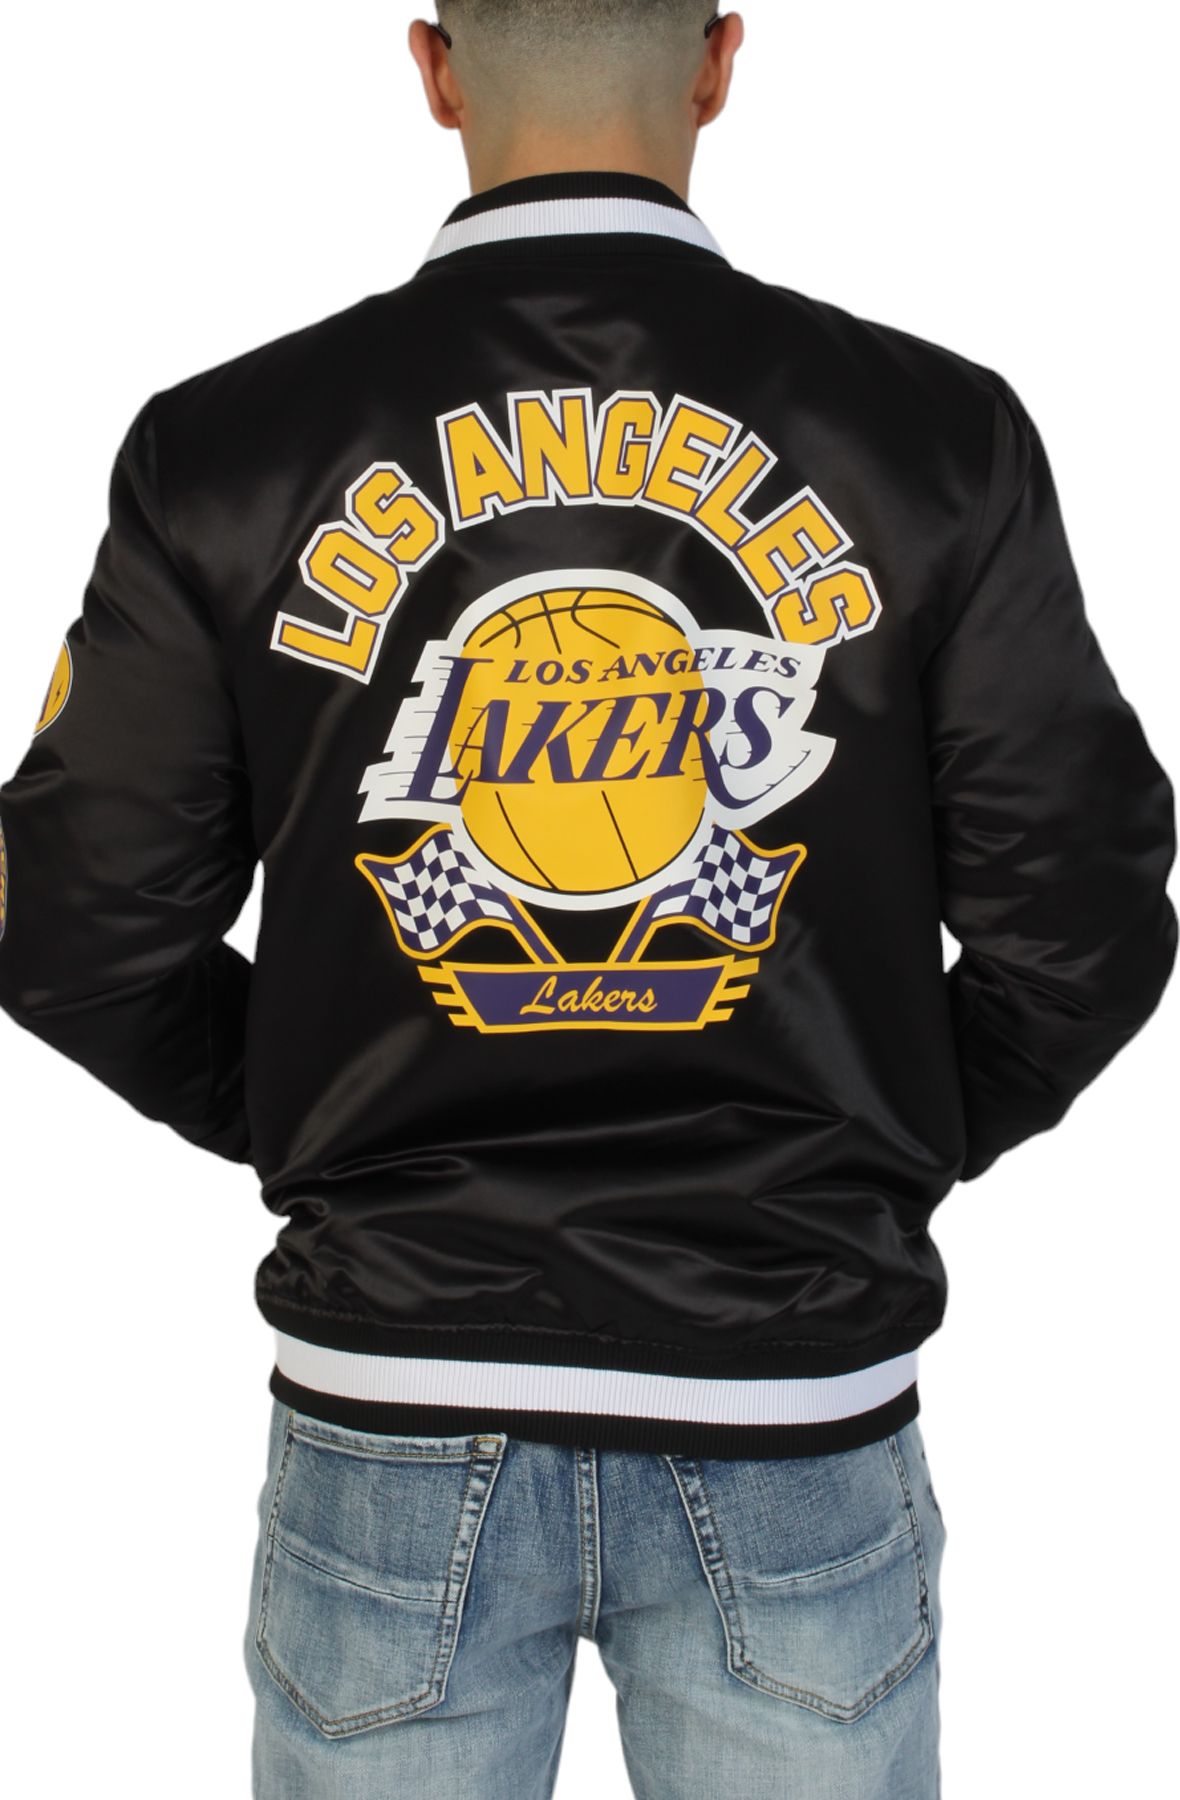 LOS ANGELES LAKERS ALL STAR JACKET 60491858